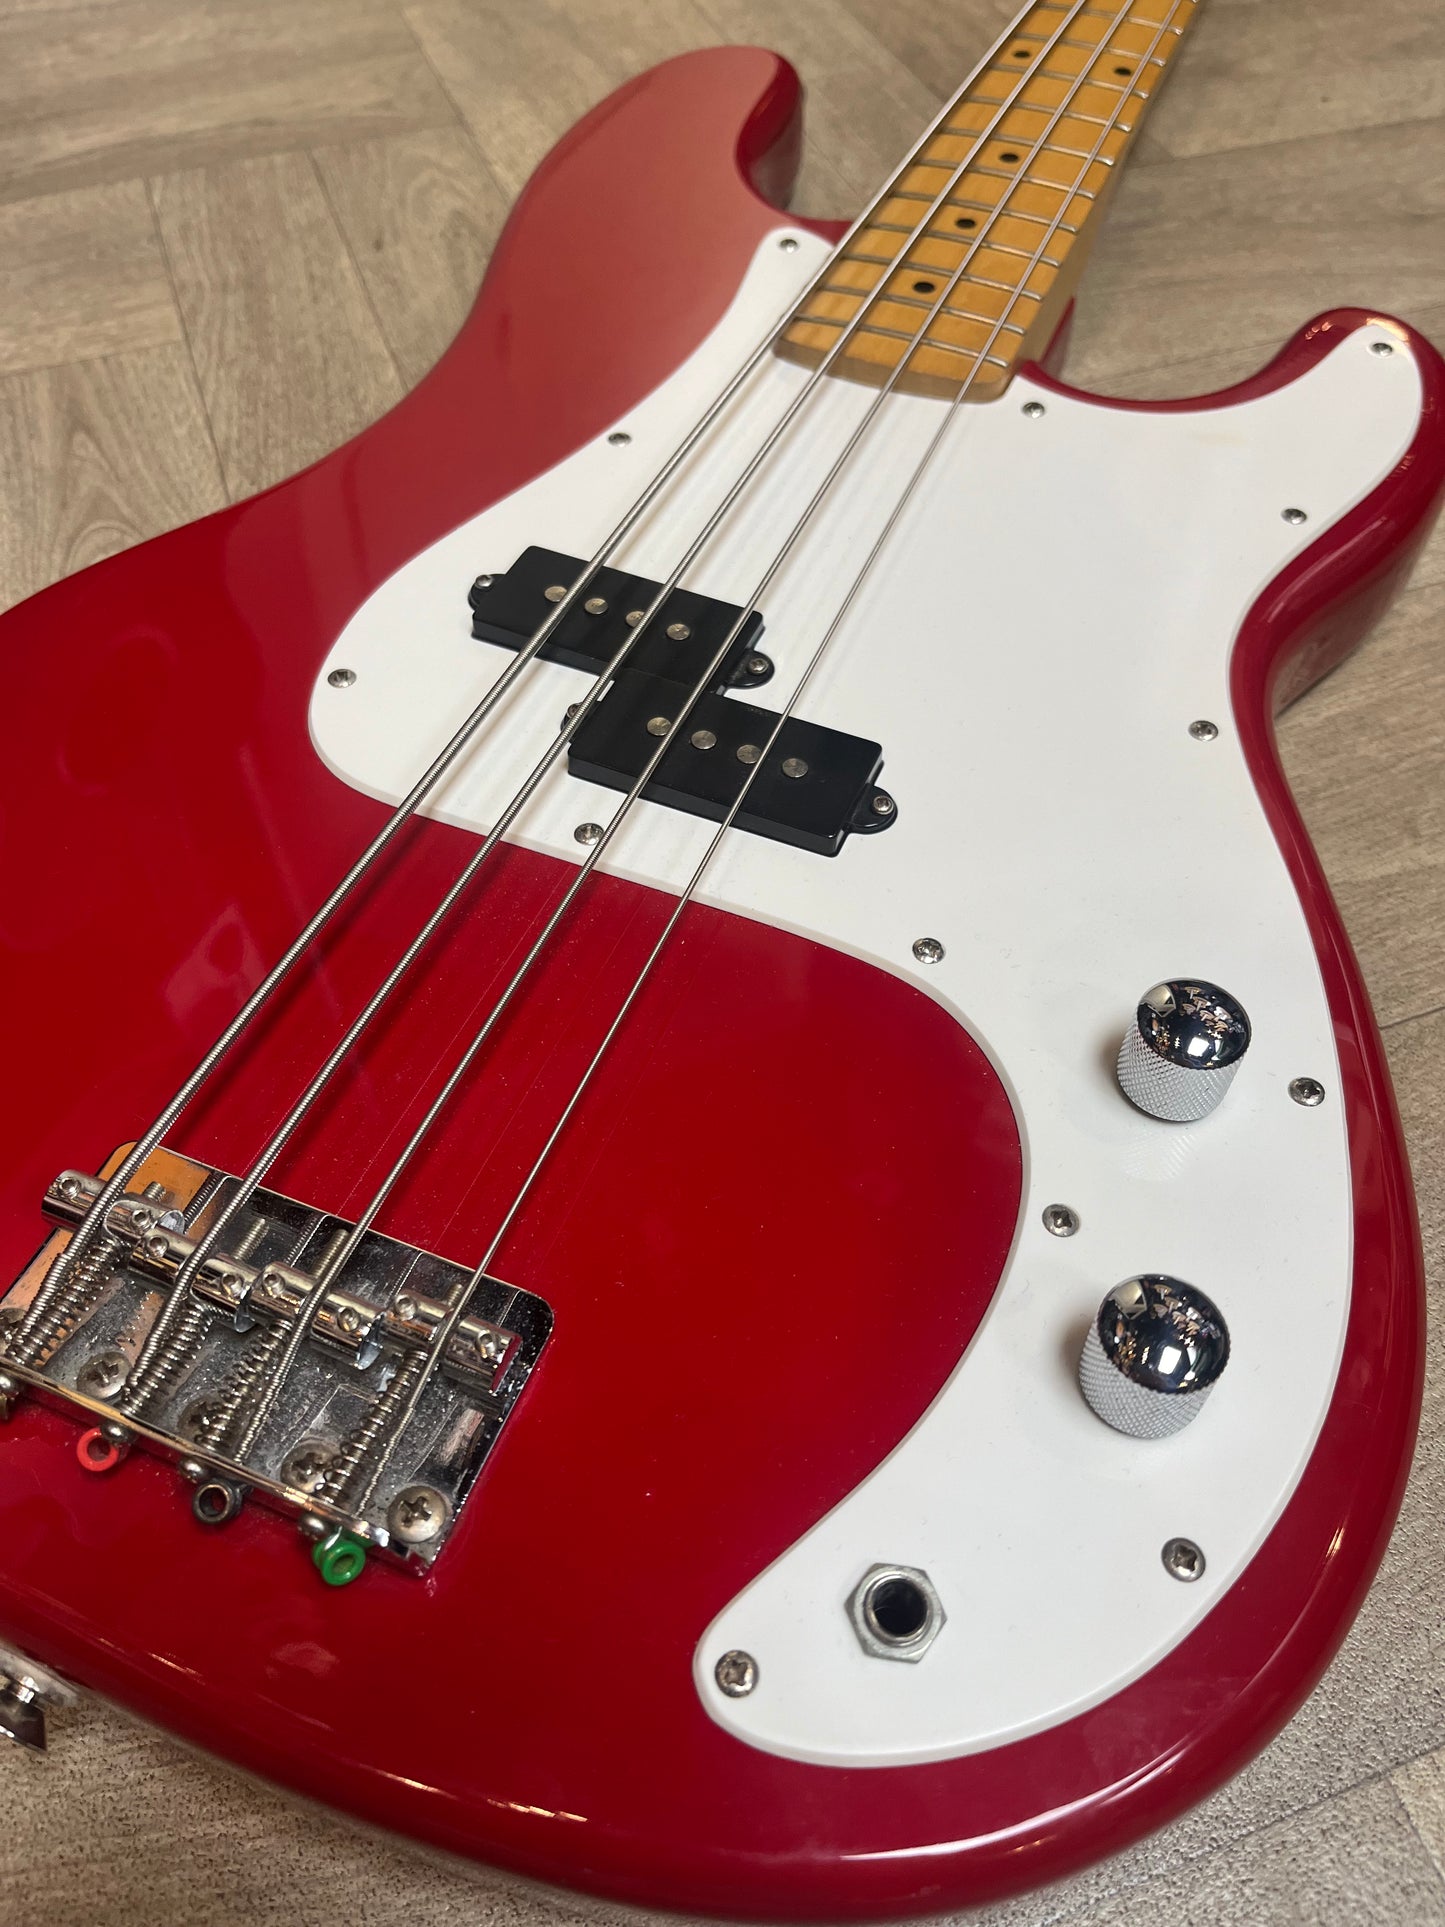 Refurbished Squier P Bass - Red